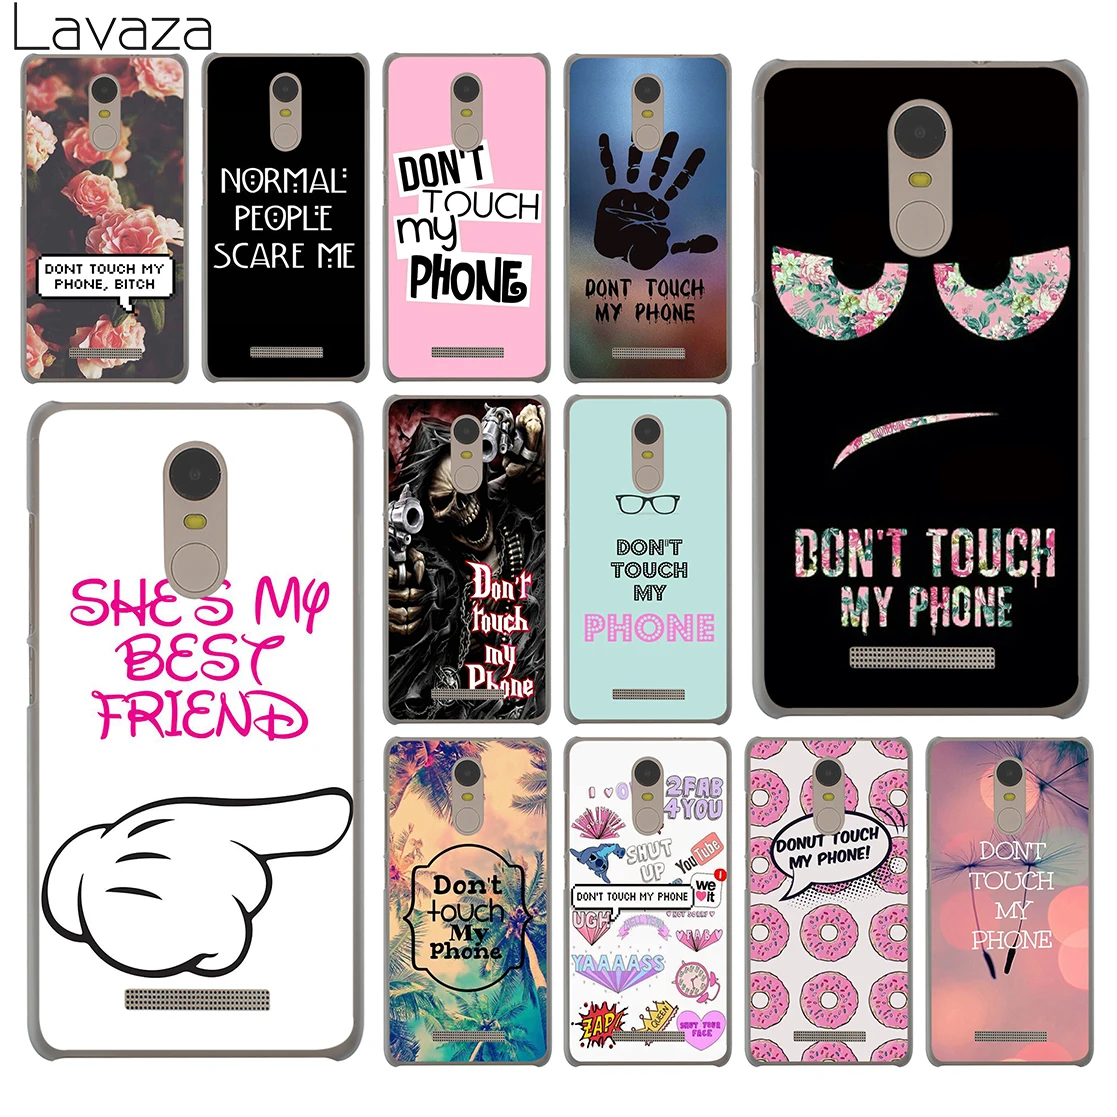 

Lavaza Do not Don't touch my phone Hard Phone Case for Xiaomi Redmi K20 7A 6A 4A GO S2 Note 8 7 5 4 4X 6 Pro Plus Cover